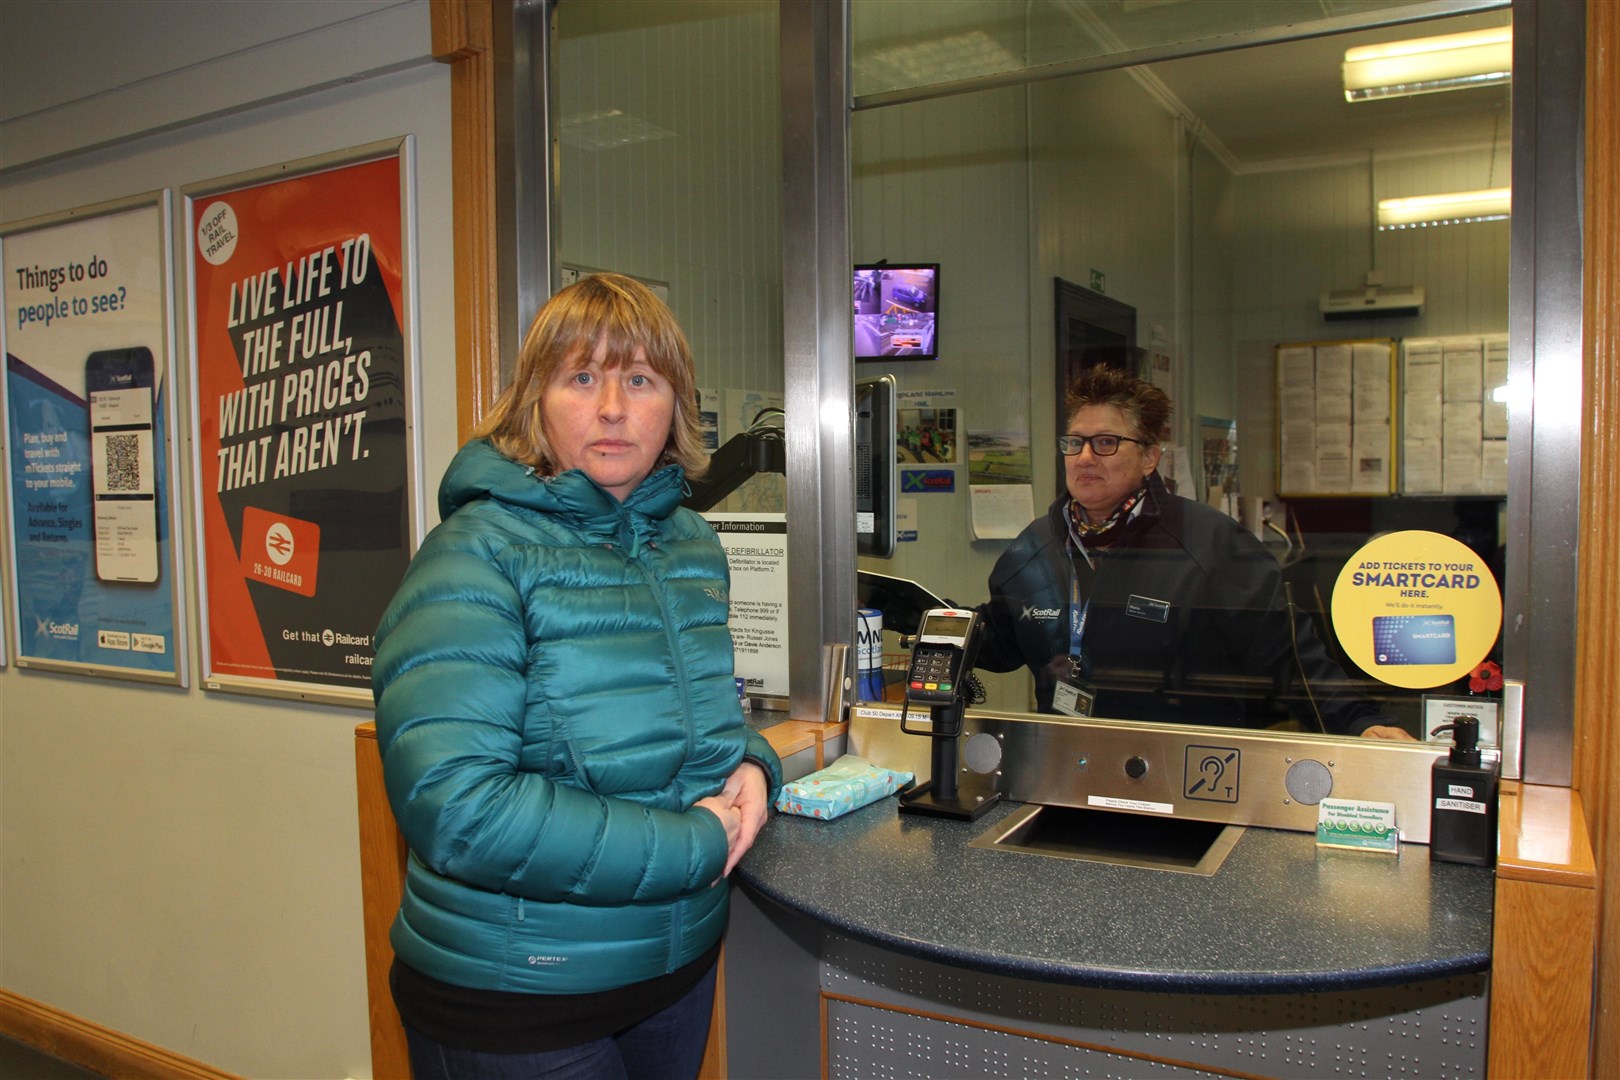 Councillor Pippa Hadley has praised the service at Kingussie Station ticket office, especially from staff member Sharon Curtis (pictured).